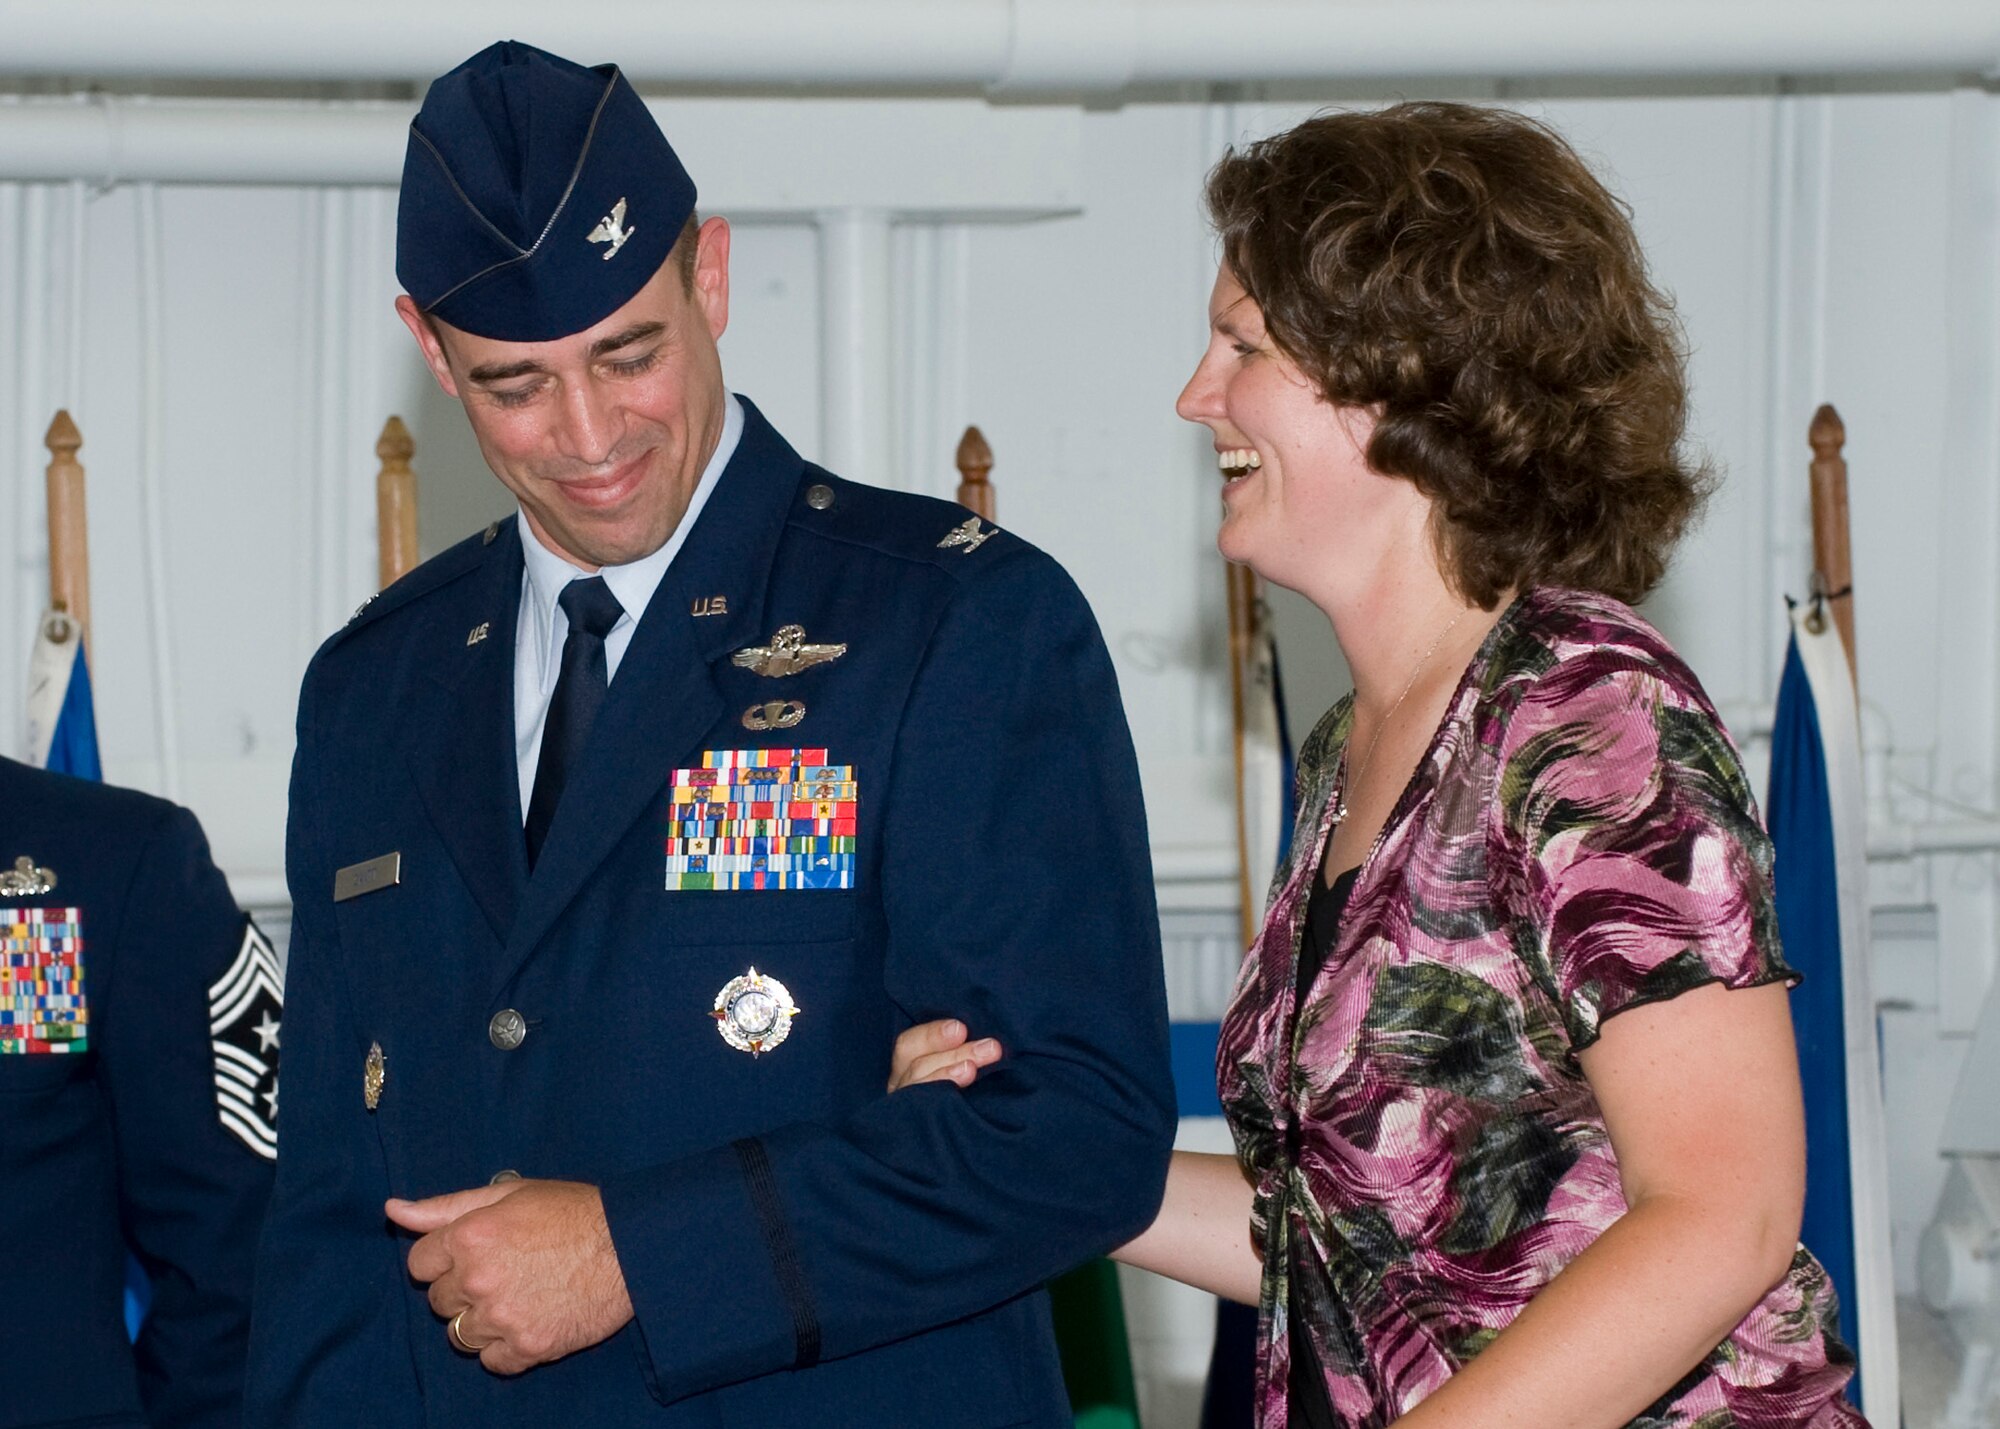 Col. Michael Gantt escorts his wife, Erica, after taking command of the 53rd Wing during a ceremony June 24 at Eglin Air Force Base.  Colonel Gantt left his position as the vice commander of the 31st Fighter Wing to take command of the 2,000-person wing.  (U.S. Air Force photo/Greg Murray)